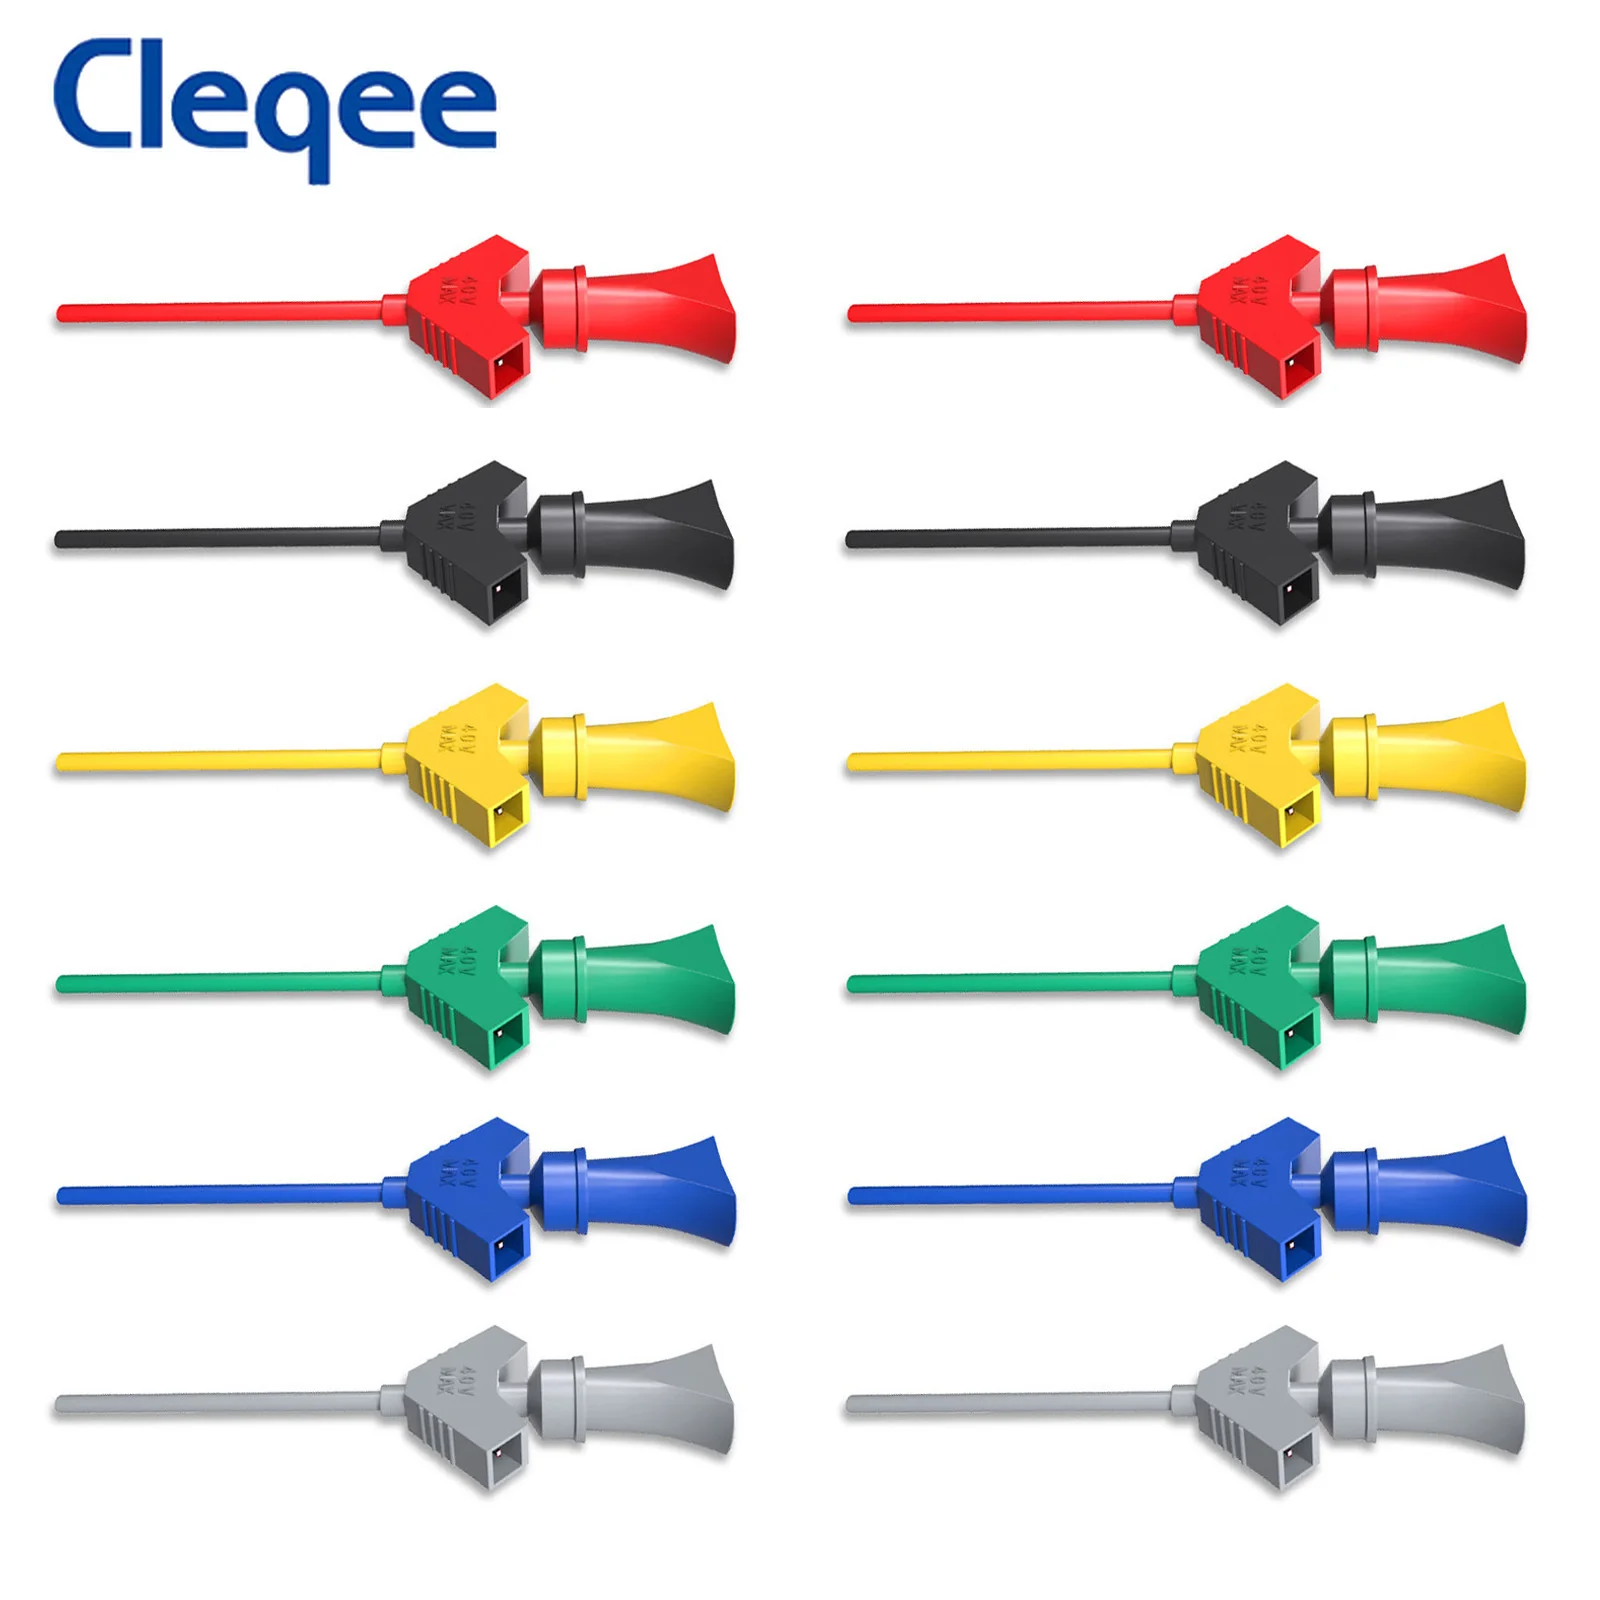 

Cleqee P5003 Mini SMD IC Test Hook Clip Jumper Test Probe Logic Analyzer Grabber Connect Dupont Test Lead Accessories 30V/5A